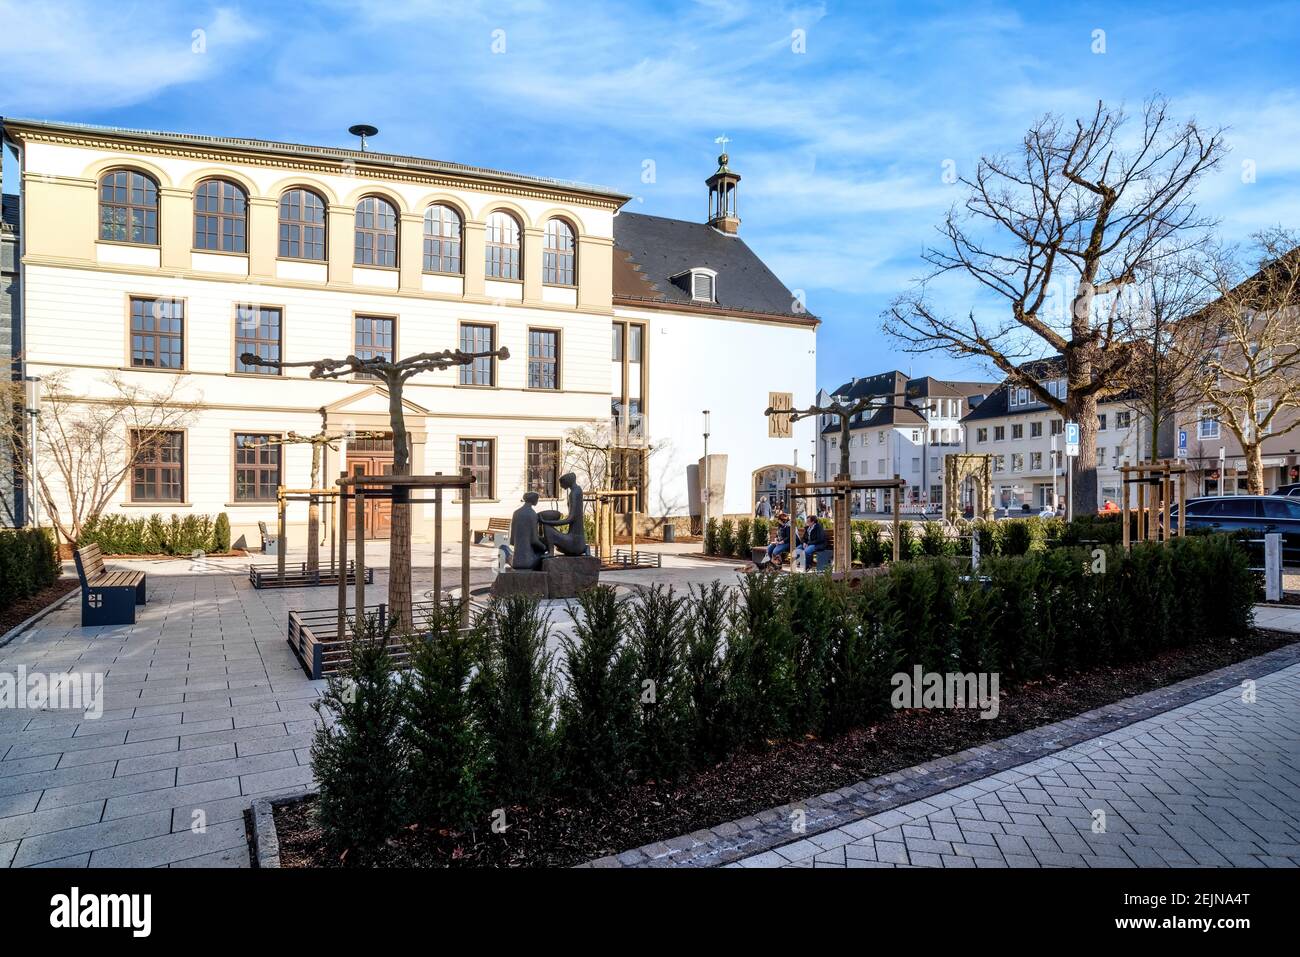 The town hall (Rathaus) in Attendorn on a sunny day in Spring. Sauerland, Germany Stock Photo